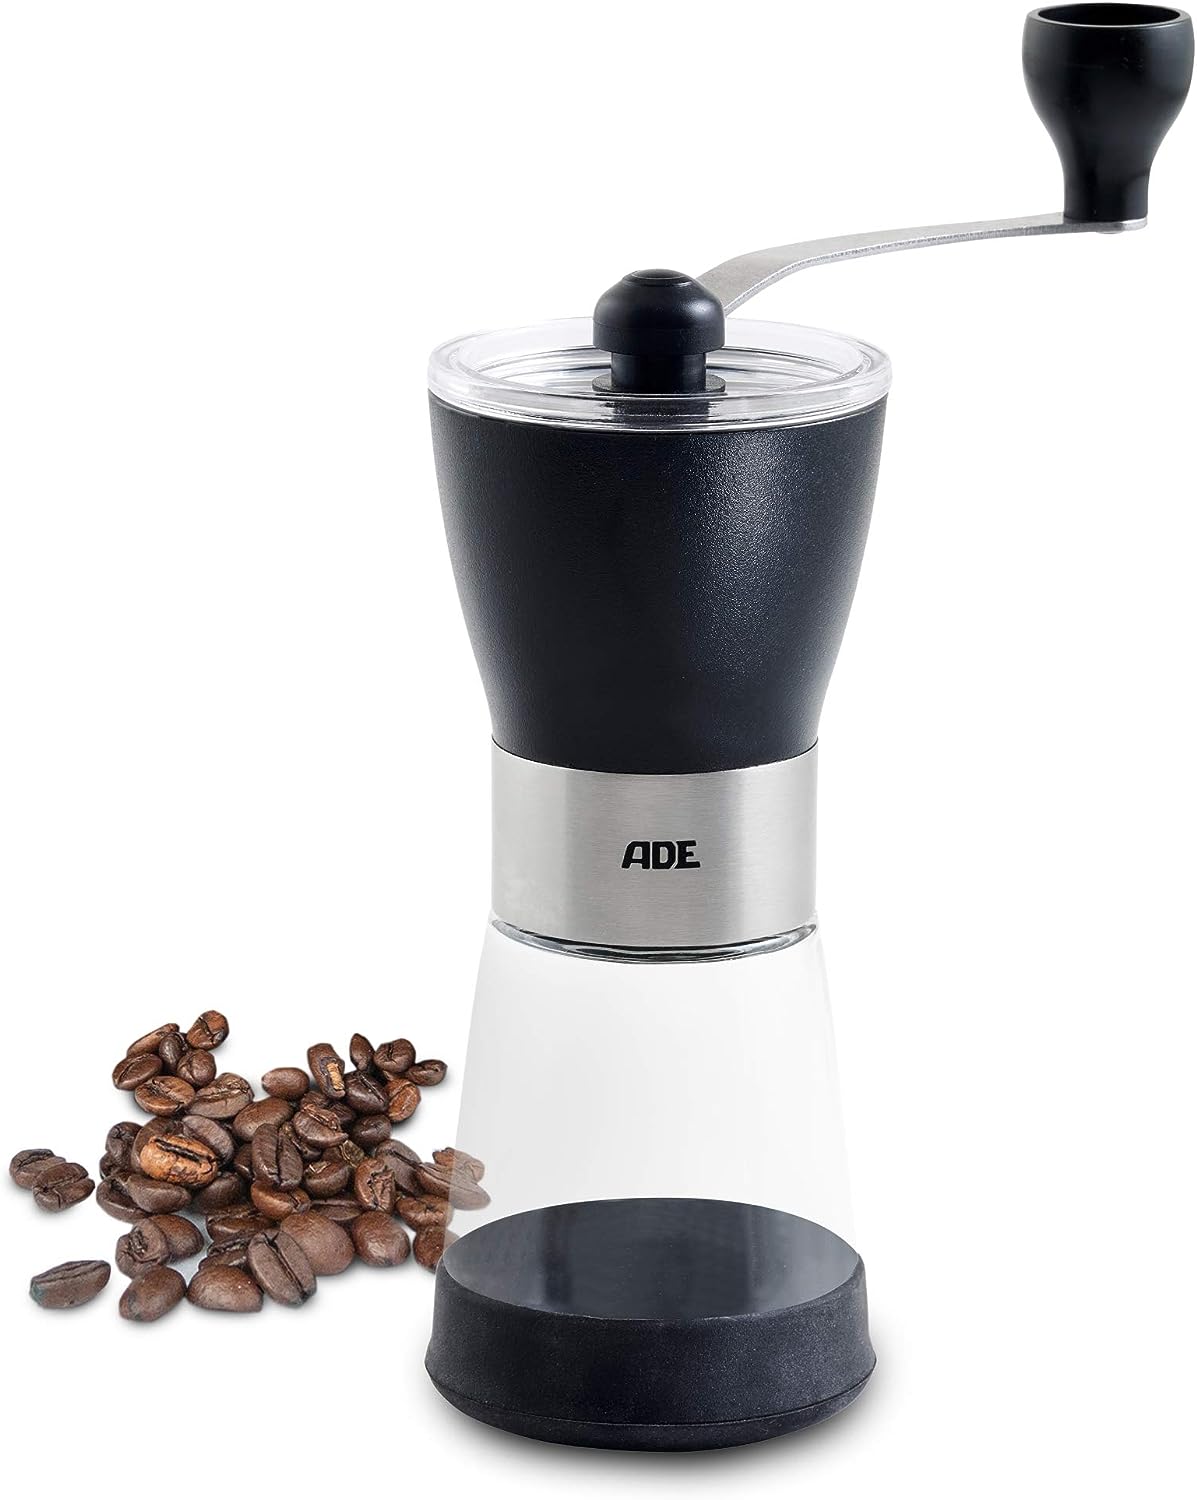 ADE Manual Coffee Grinder with Conical Ceramic Grinder | Continuous Grinding Level | for 65 g Coffee Powder